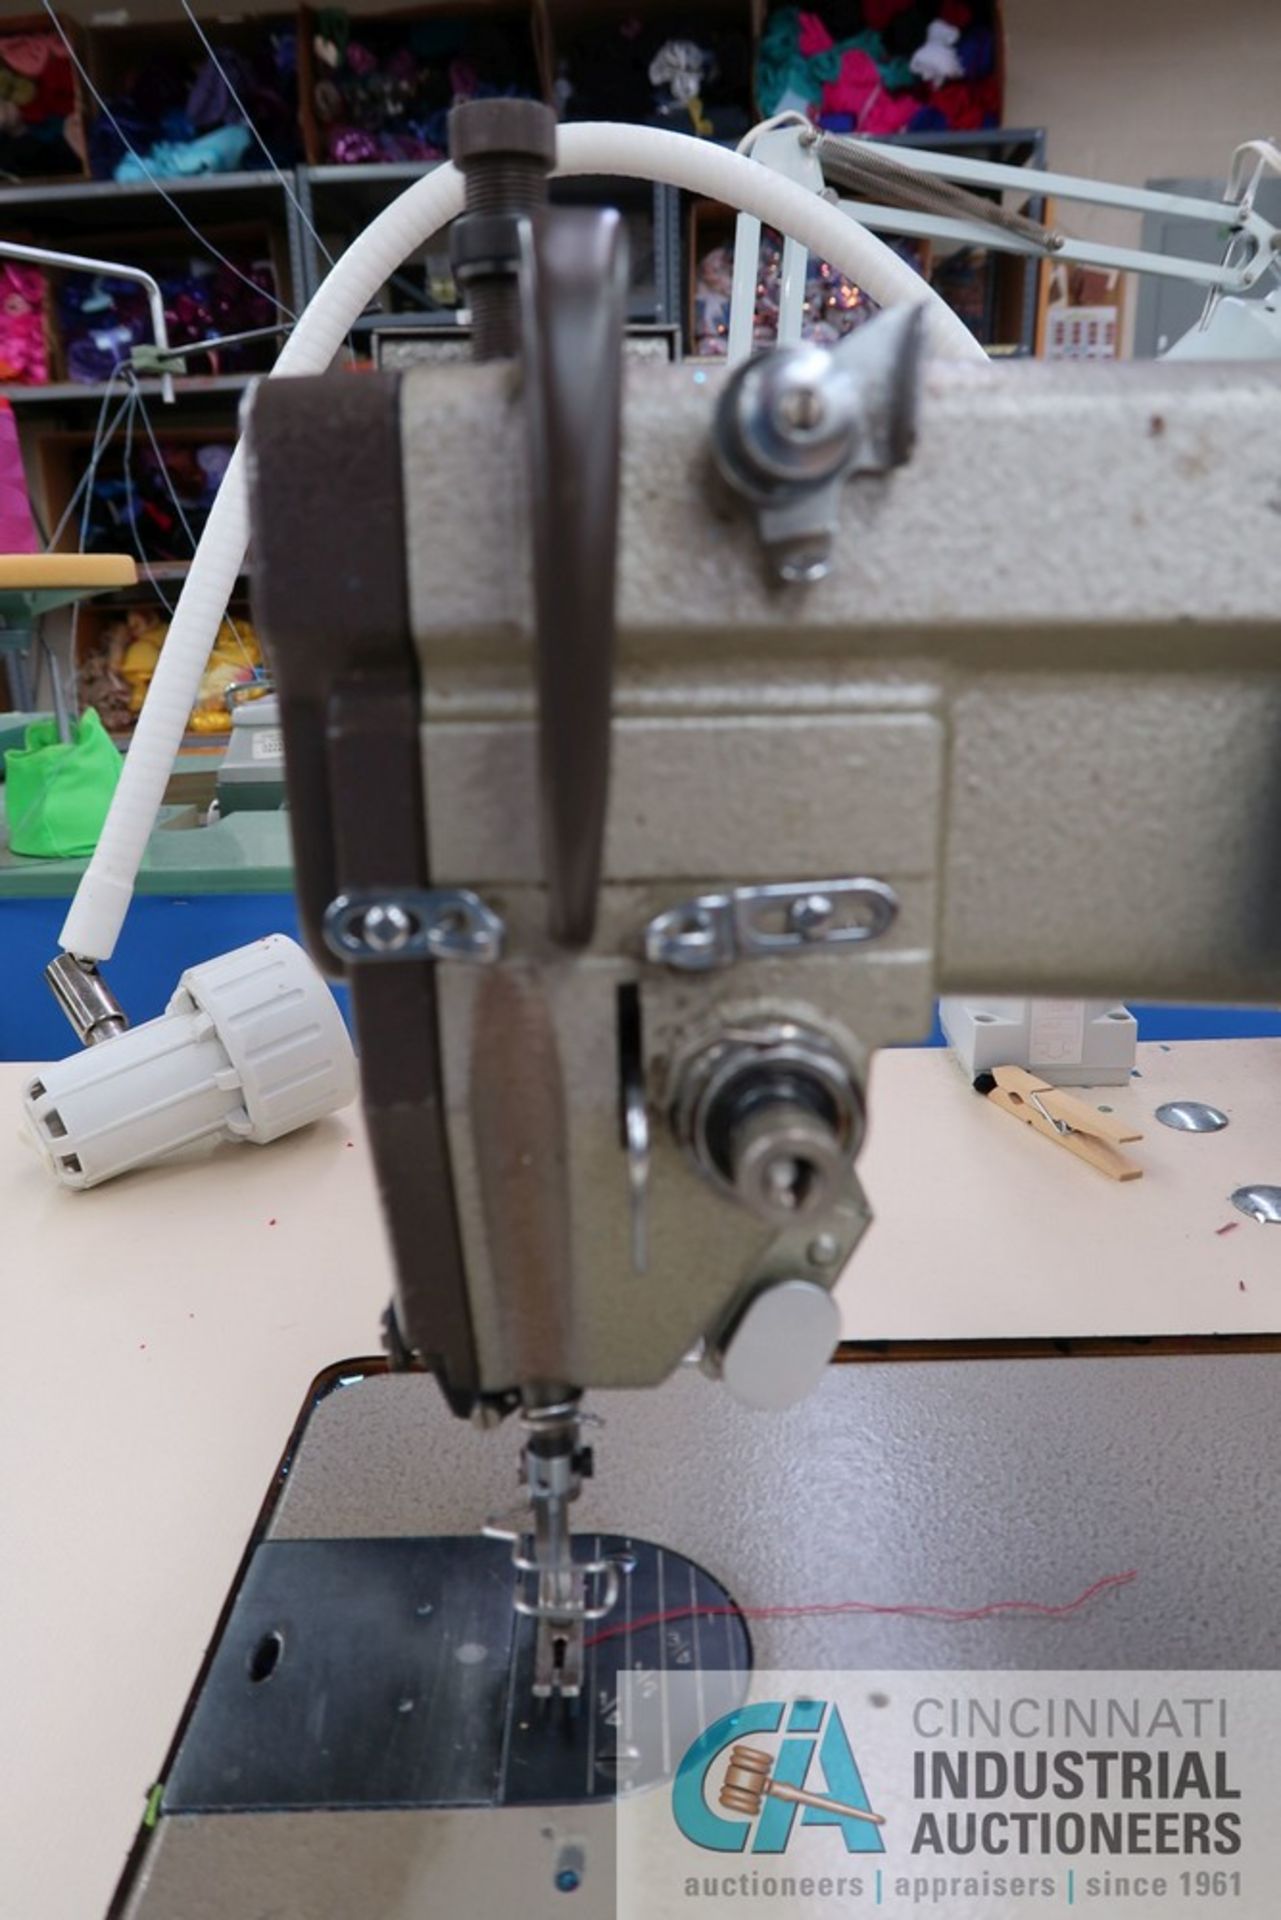 **MITSUBISHI MODEL LS2-180 SINGLE NEEDLE SEWING MACHINE** Located at 1st Location - Prospect Rd - Image 4 of 6